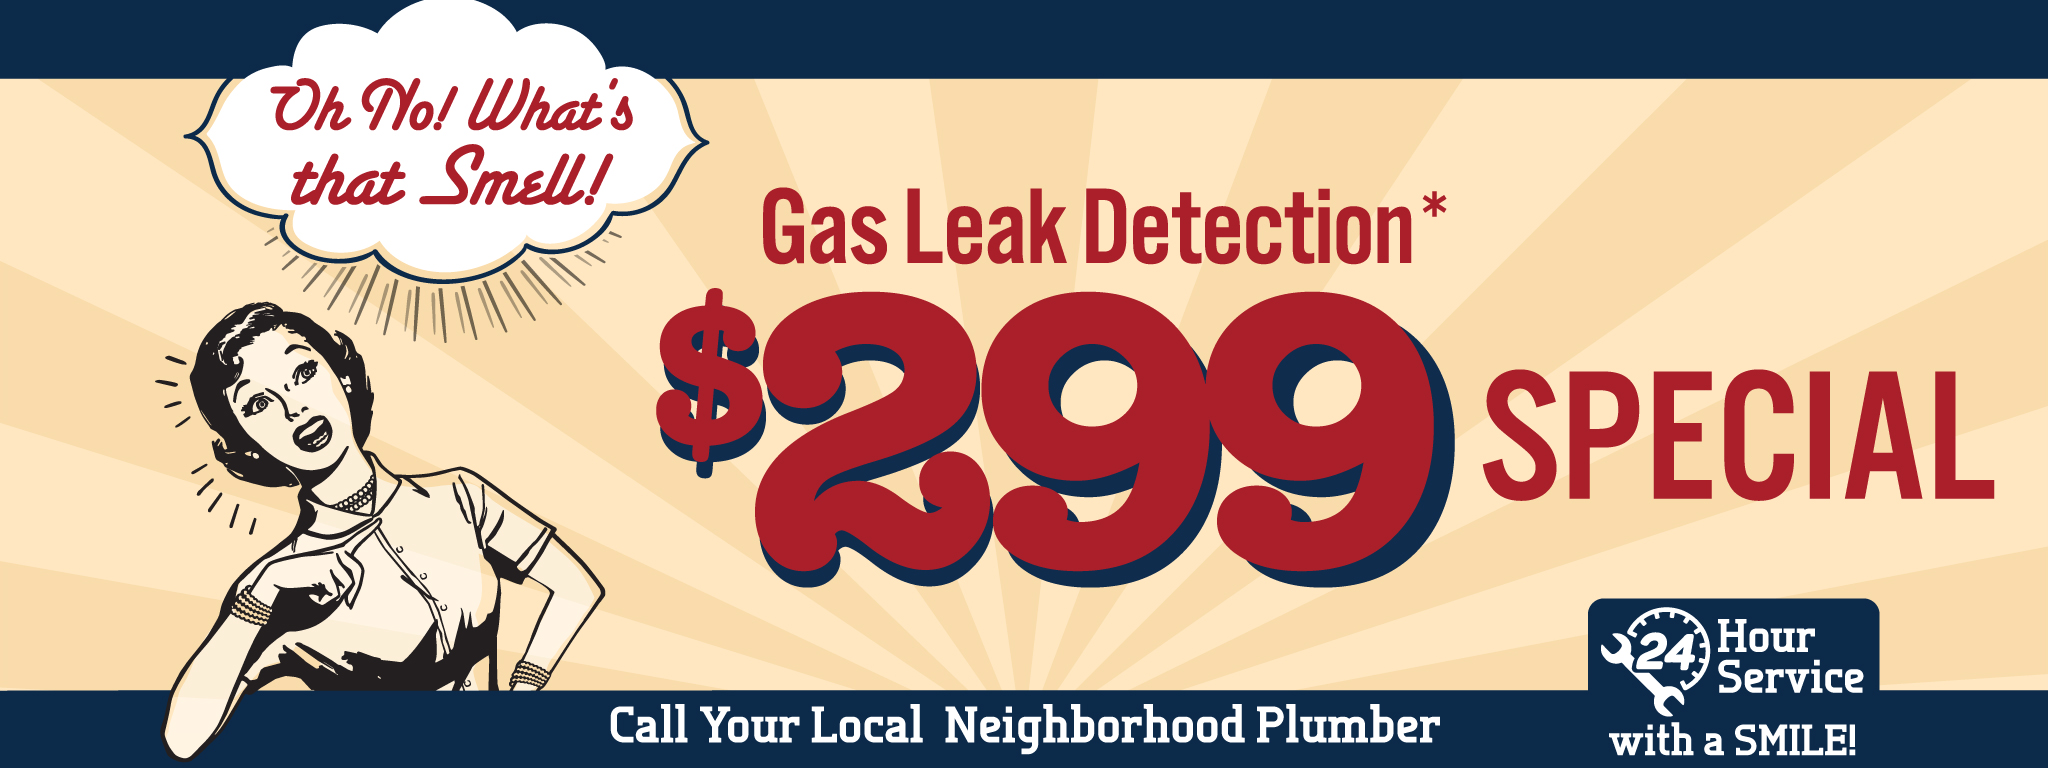 LSP-Digital-HomePg-Banners-Offers--Gas-Leak-Detection-Aug2018-2048x768px